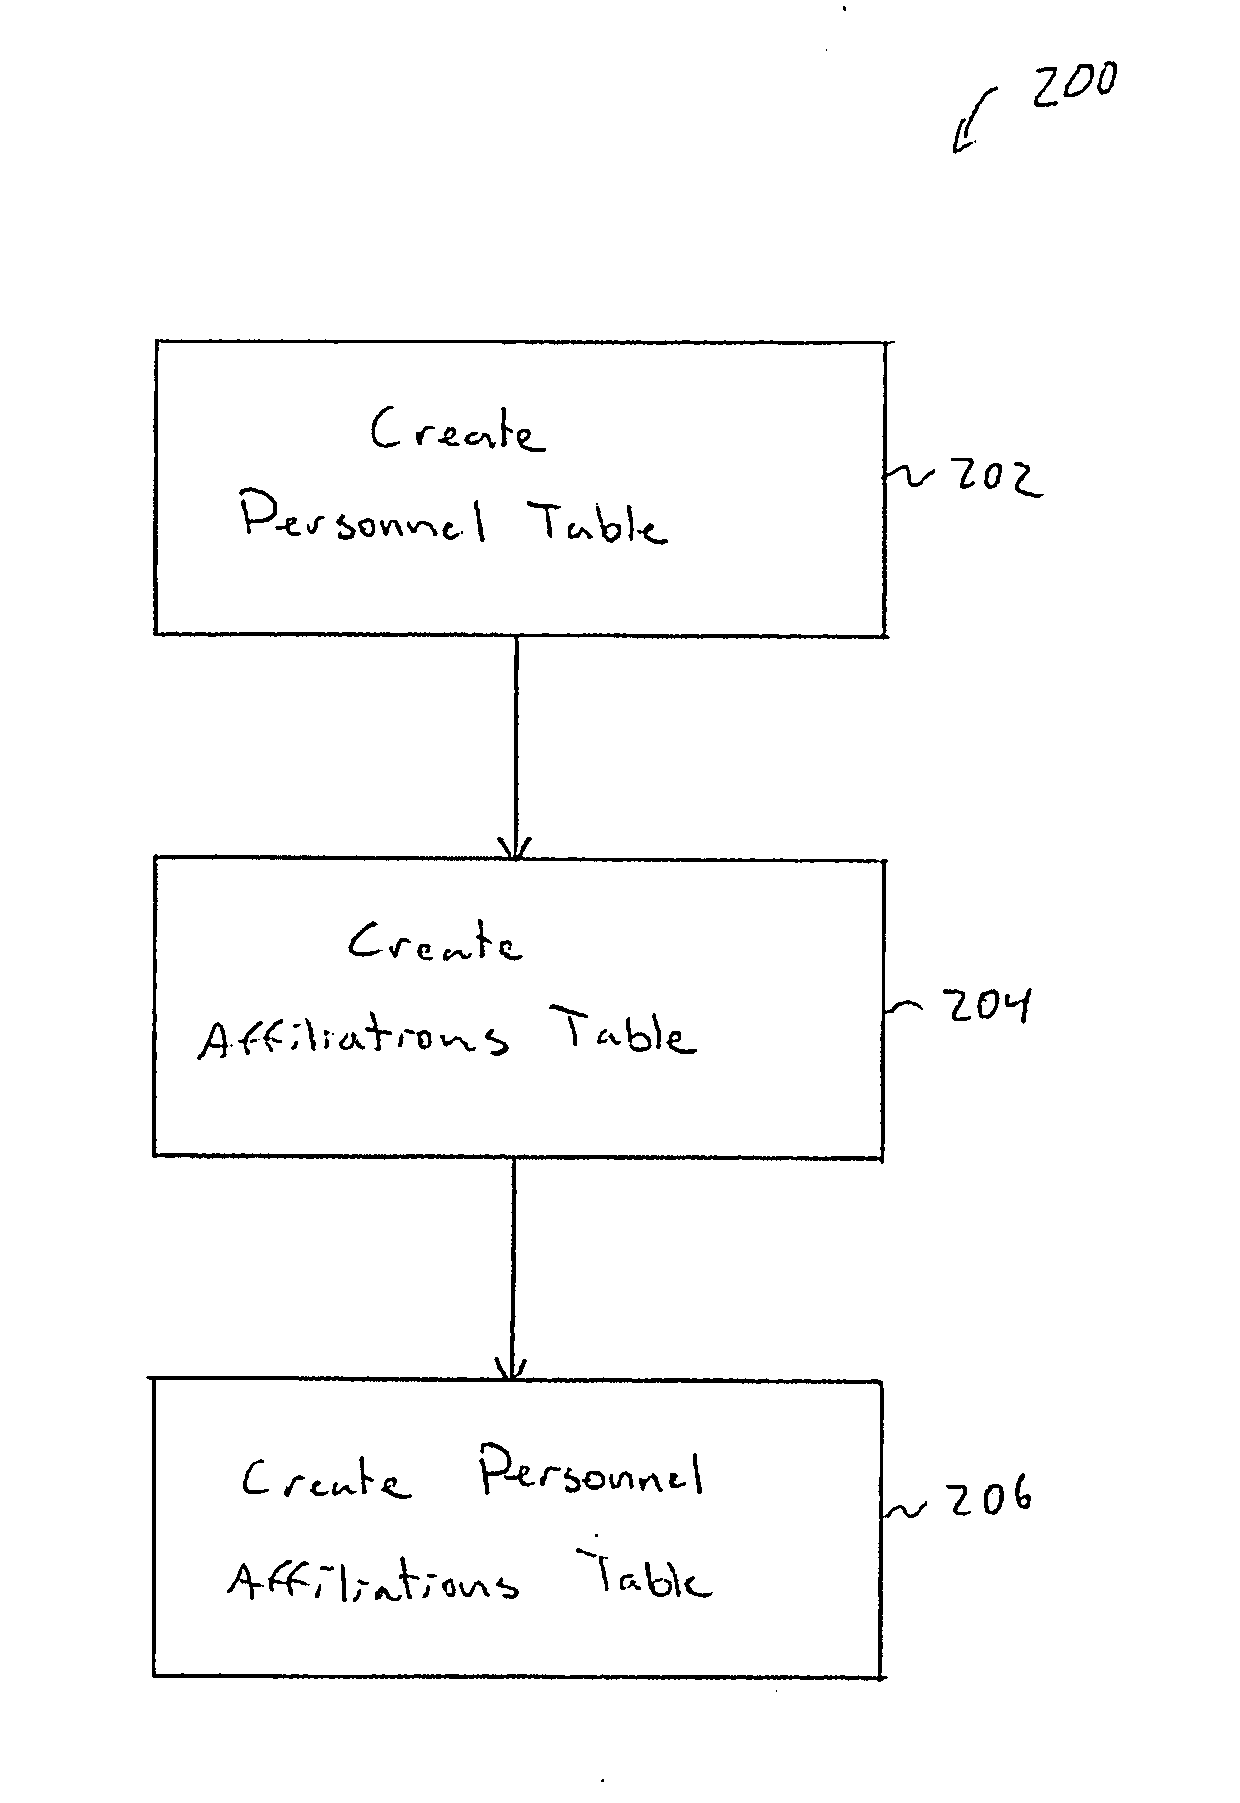 System for and method of processing business personnel information